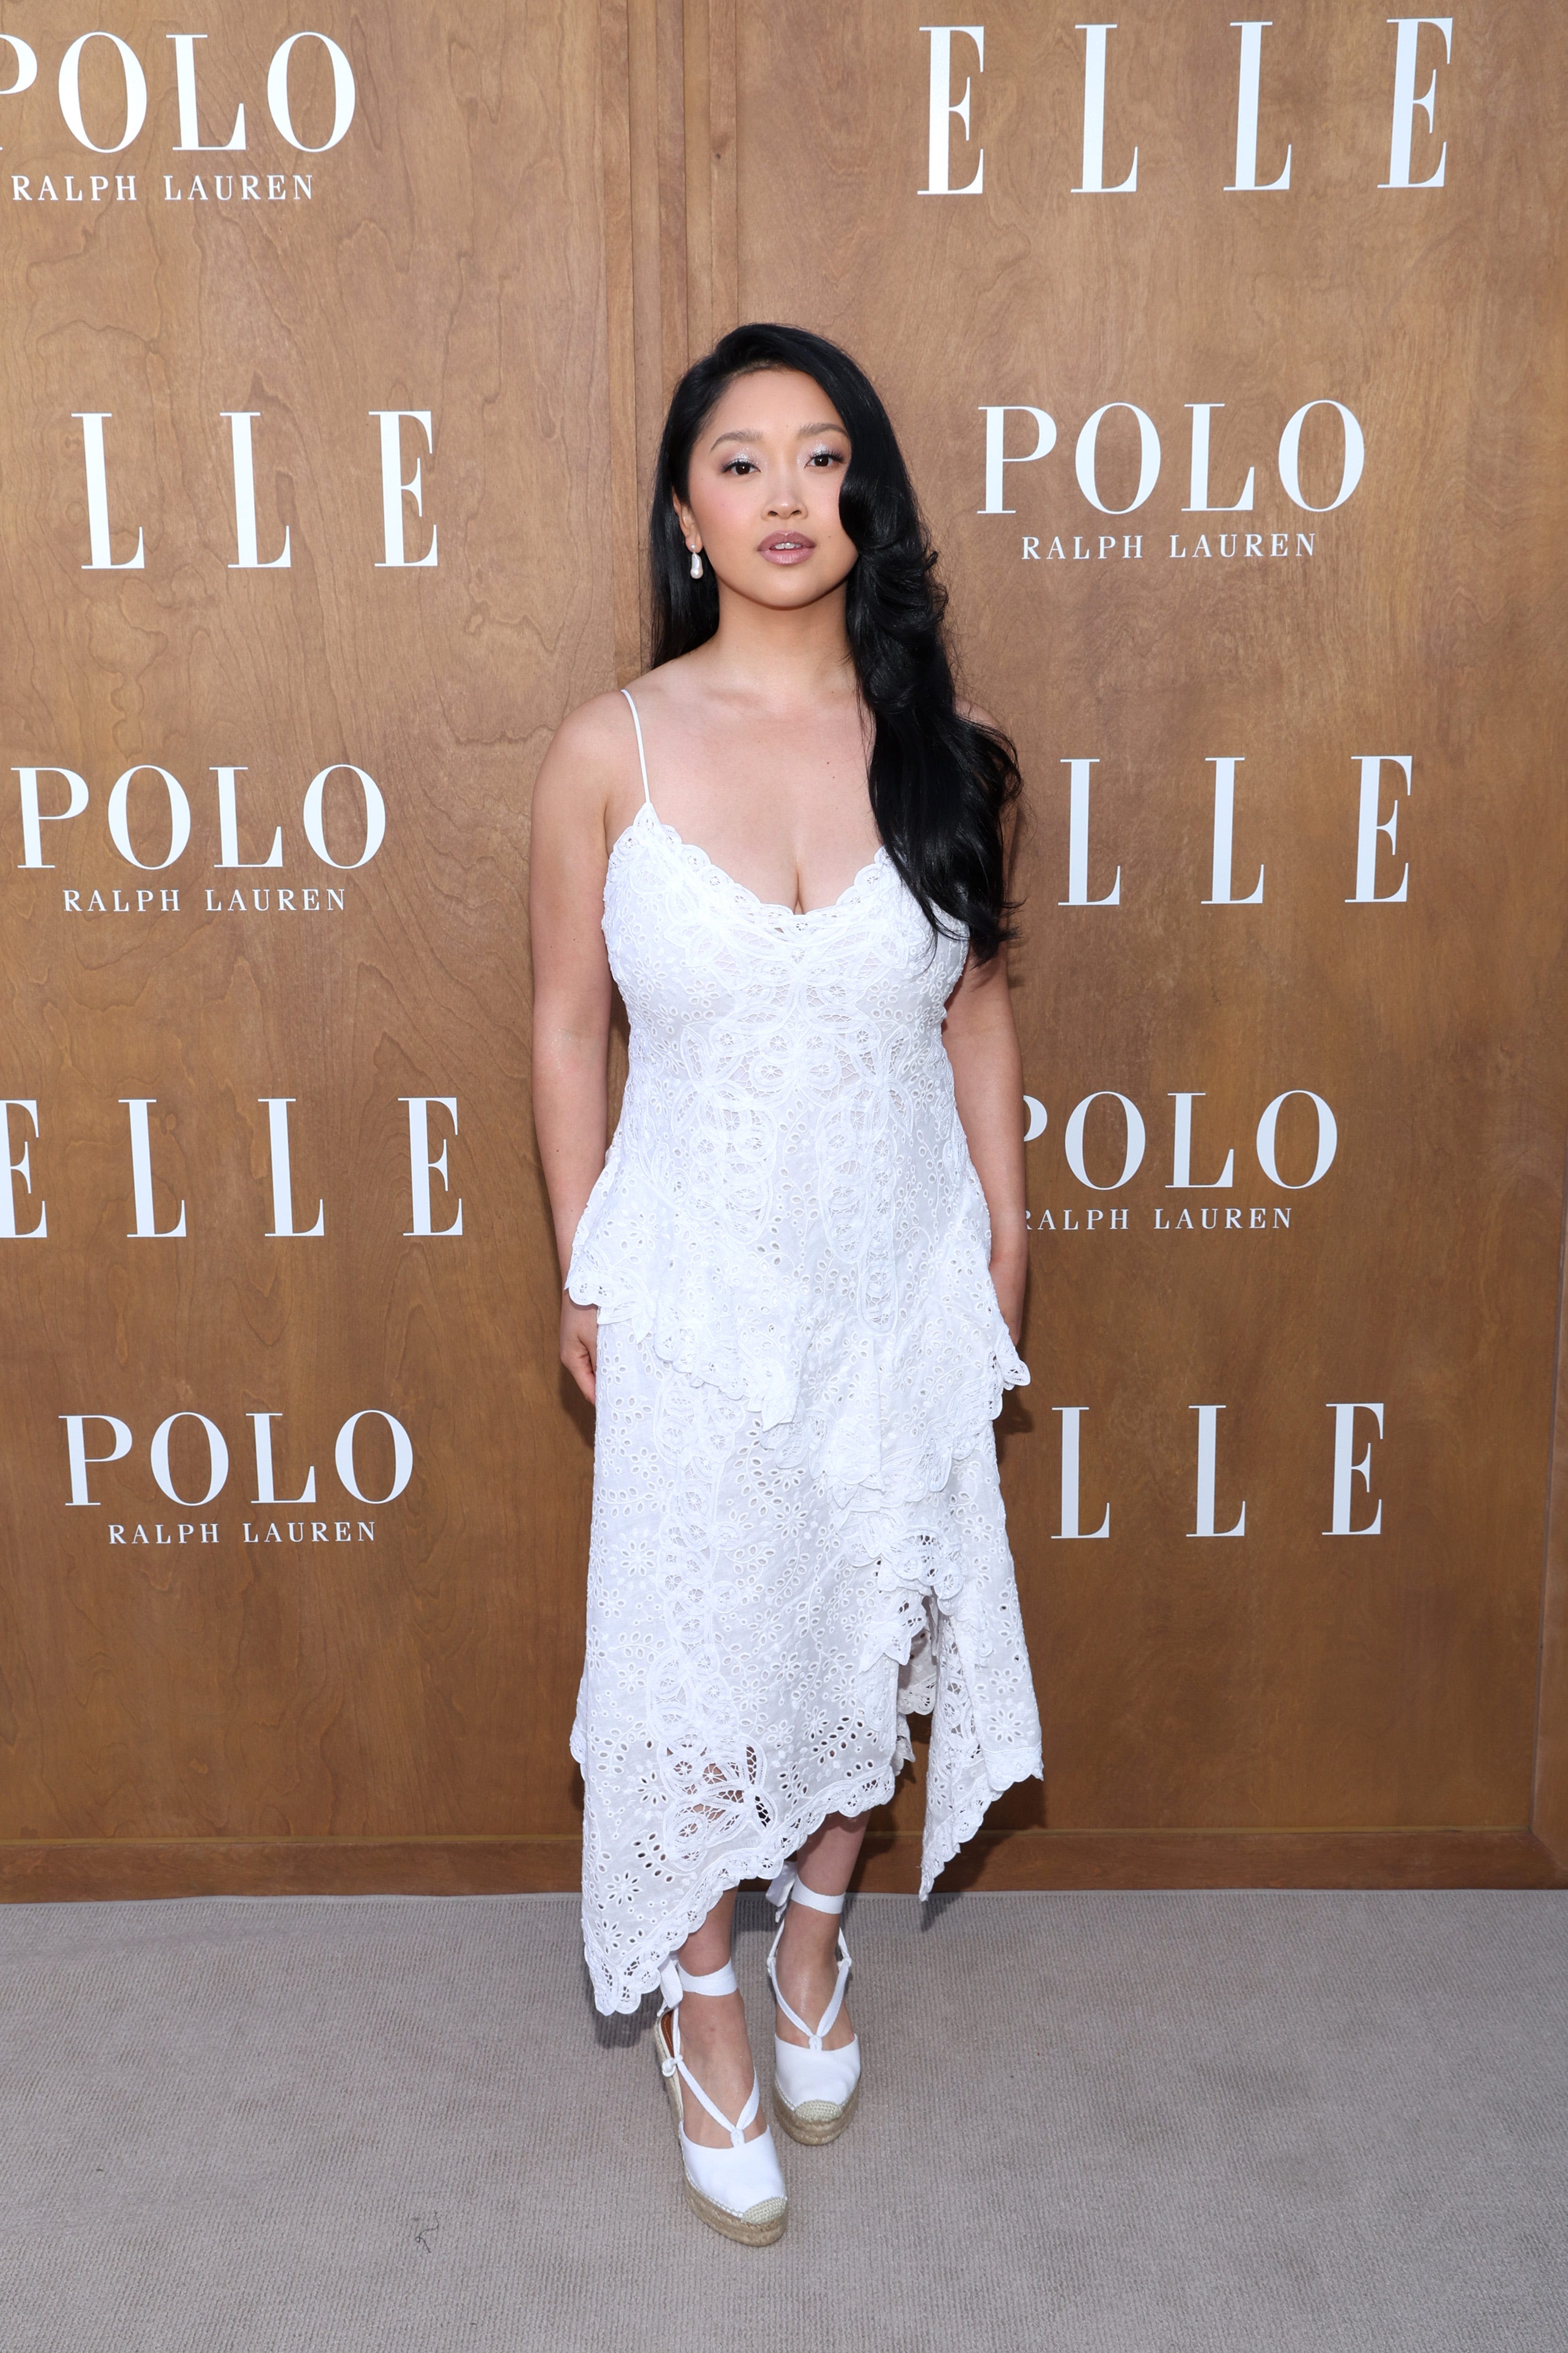 Lana Condor mourns loss of mom: 'I miss you with my whole soul'